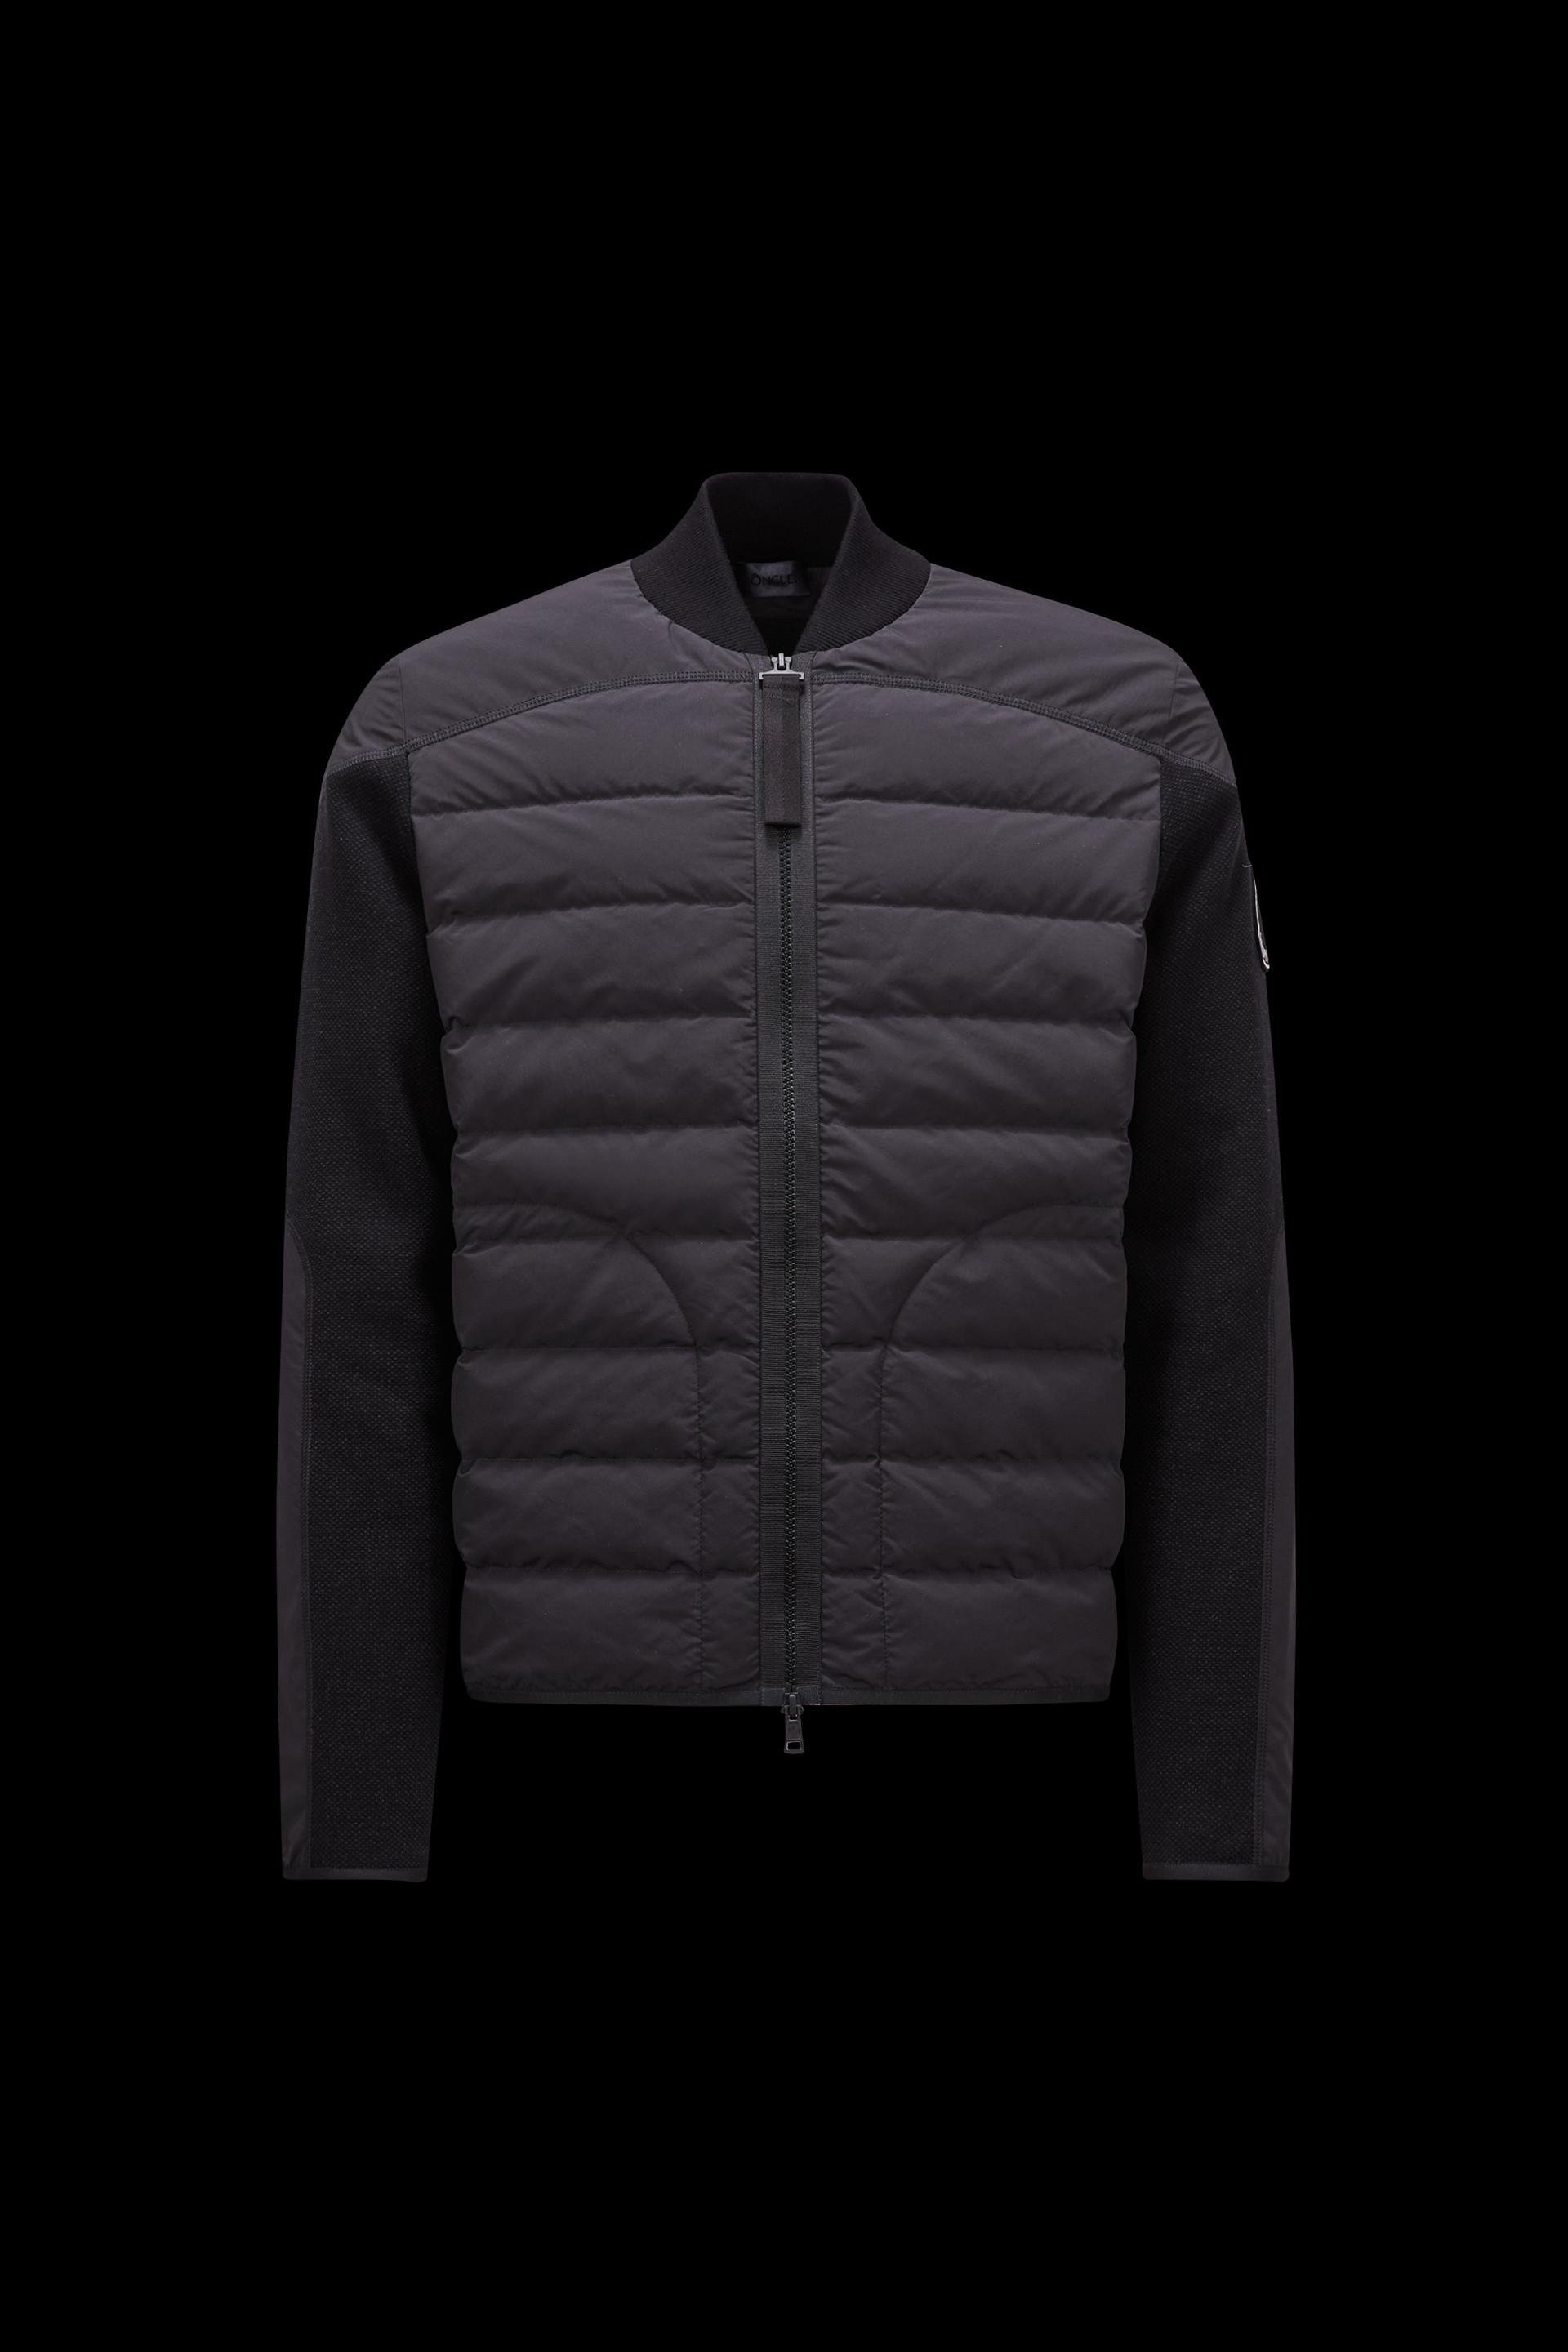 Padded Cotton Zip-Up Cardigan by MONCLER